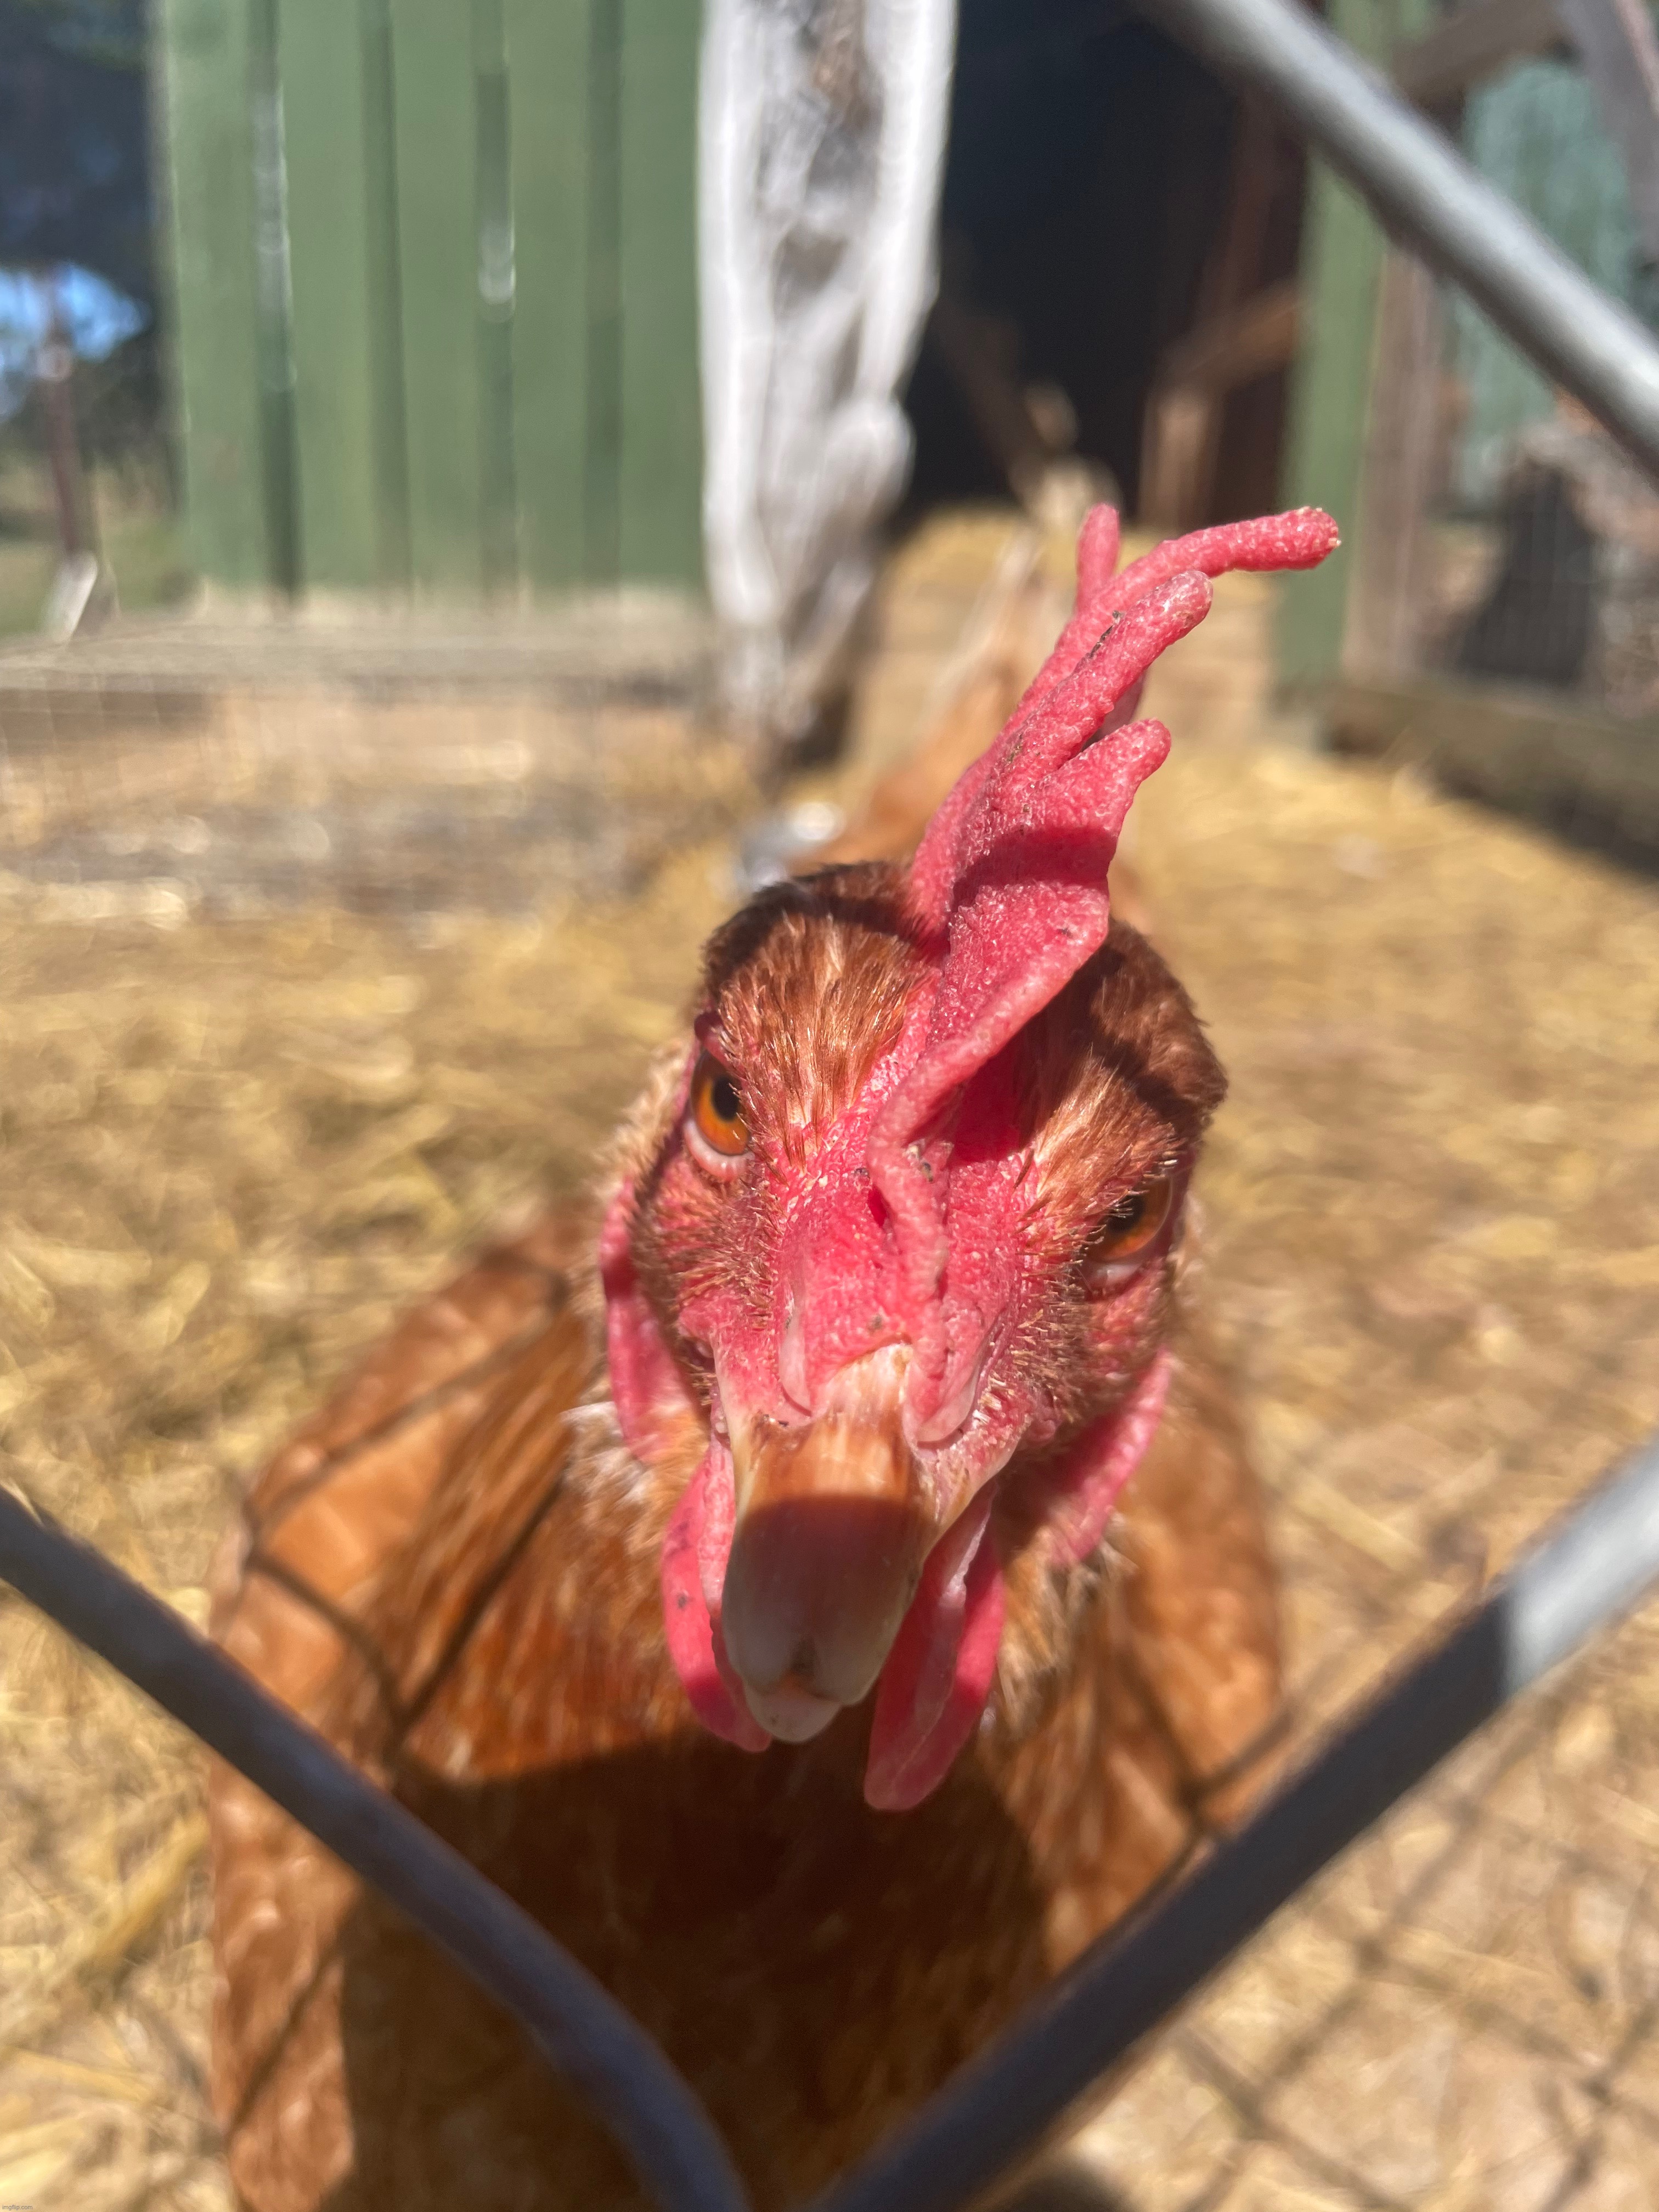 This is a photo of one of my other hens. Isn’t she cute | image tagged in chicken,cock,photography,photos | made w/ Imgflip meme maker